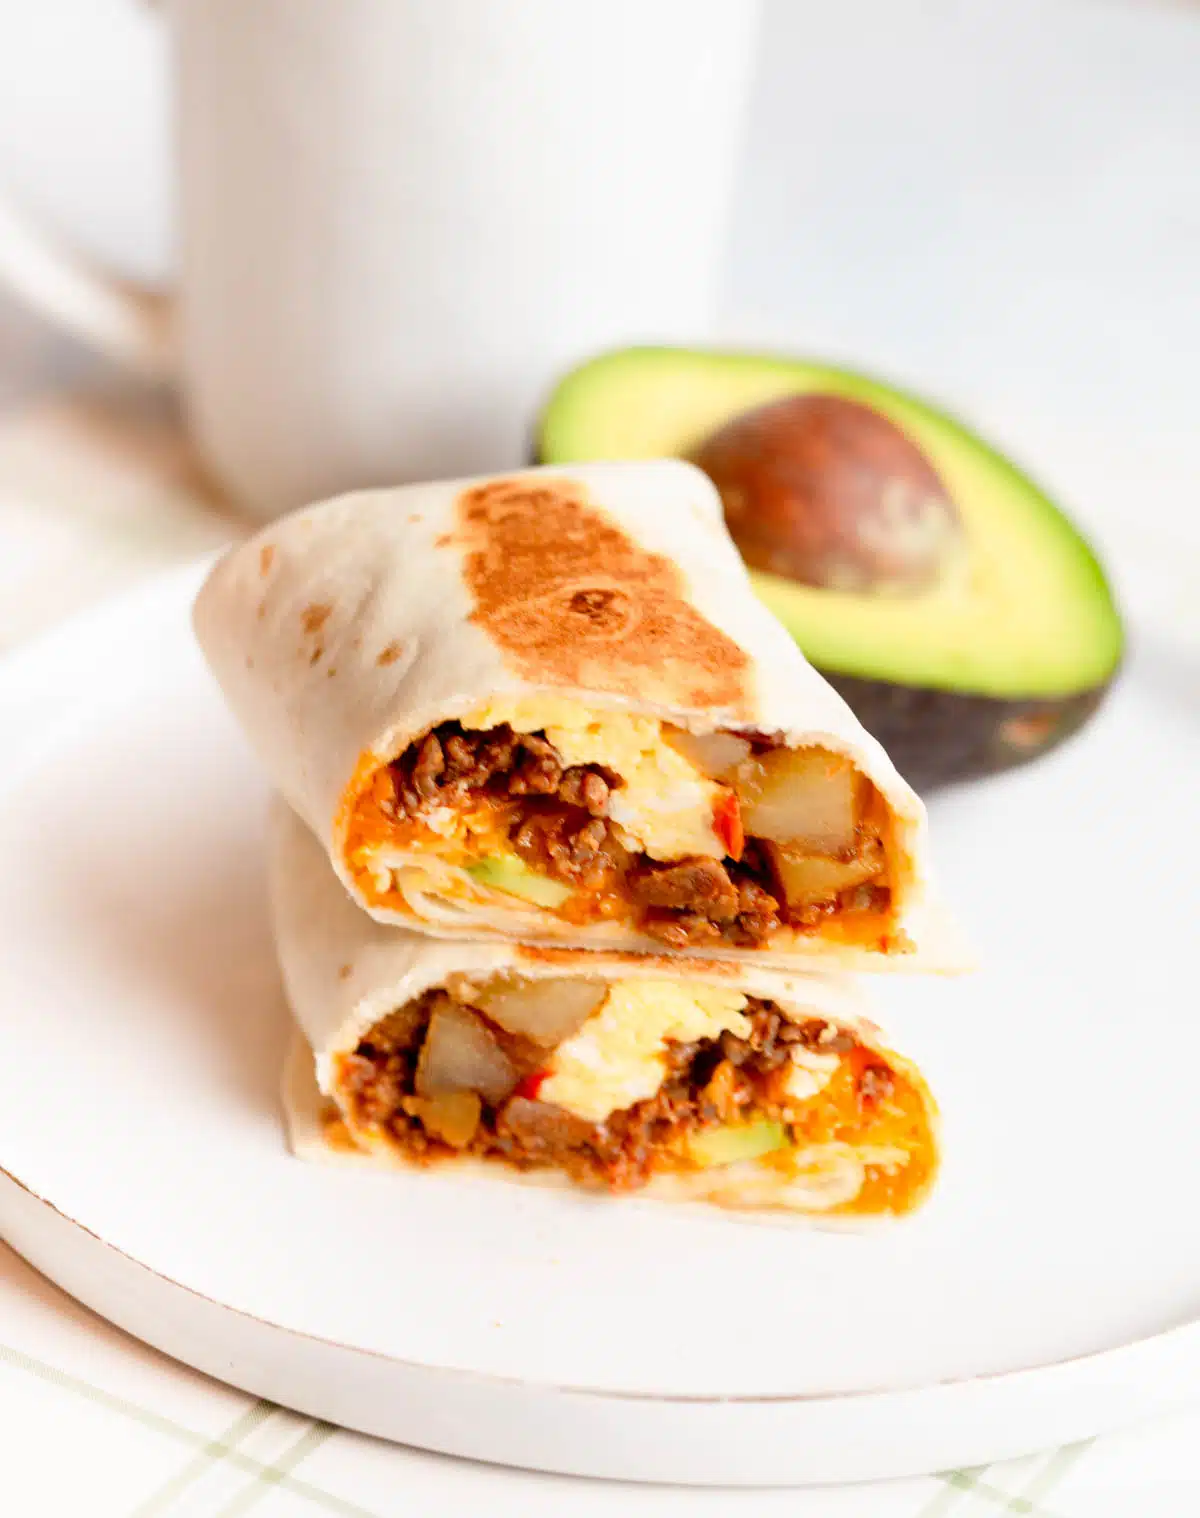 Chorizo Potato Breakfast Burrito cut in half with one half sitting on top of the other one, with an avocado in the background.